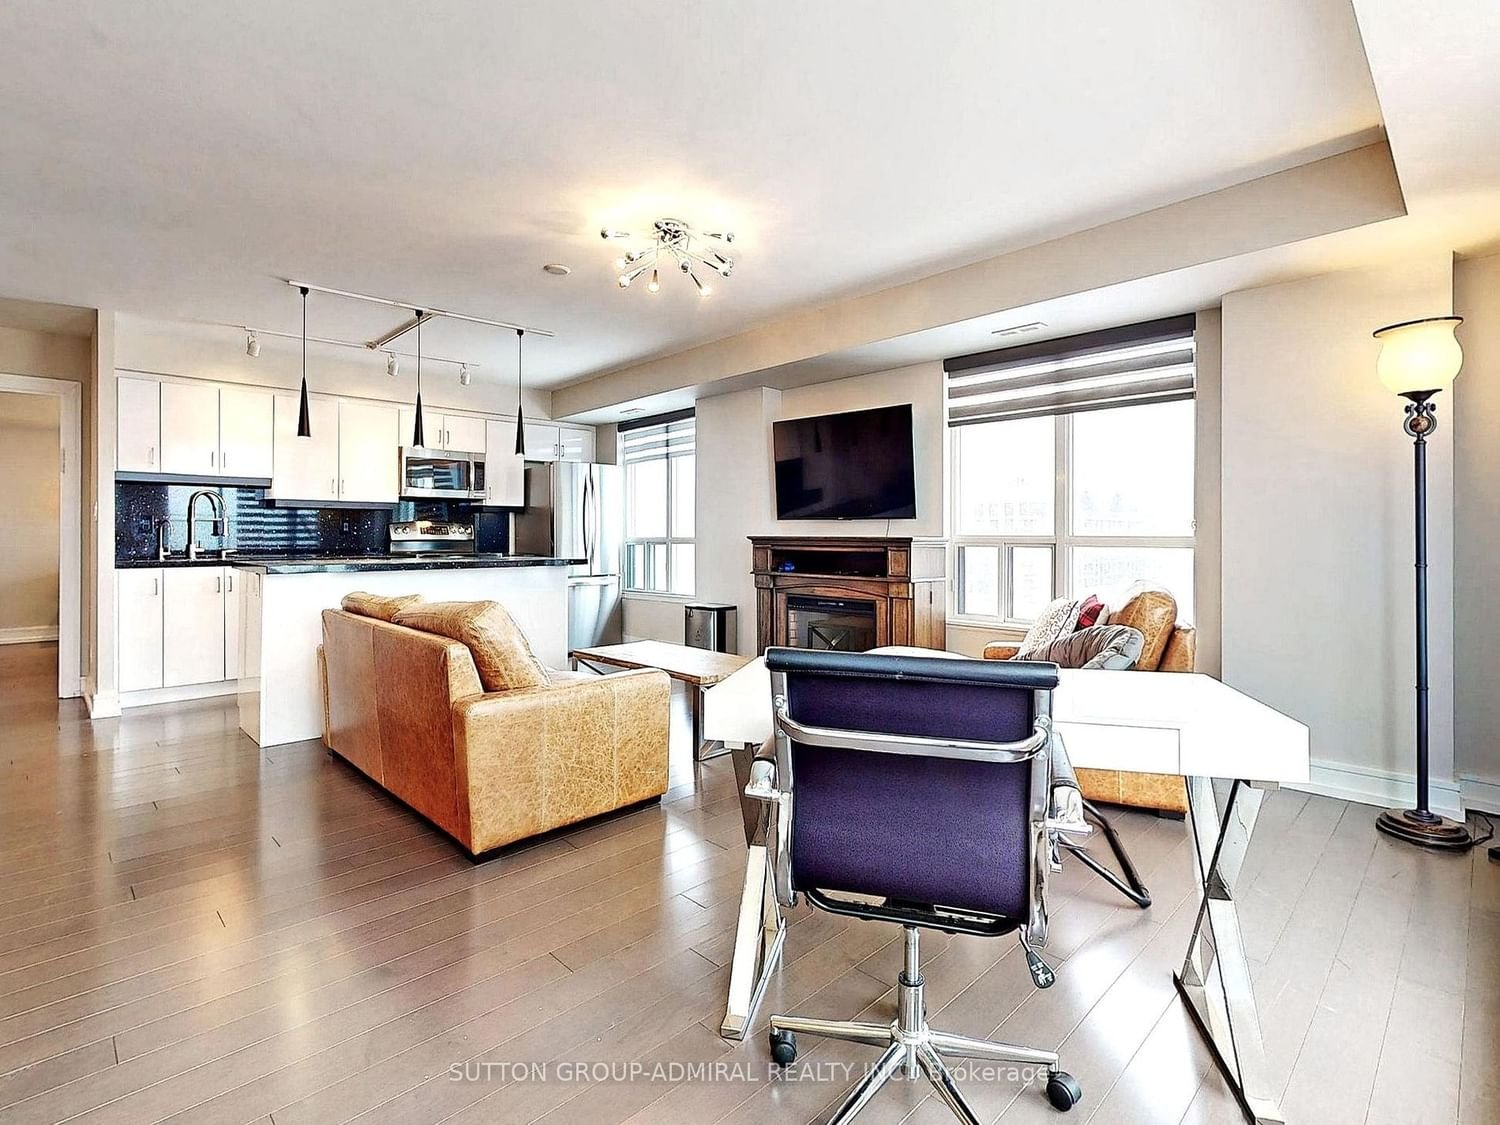 801 Sheppard Ave W, unit Ph #803 for sale - image #6